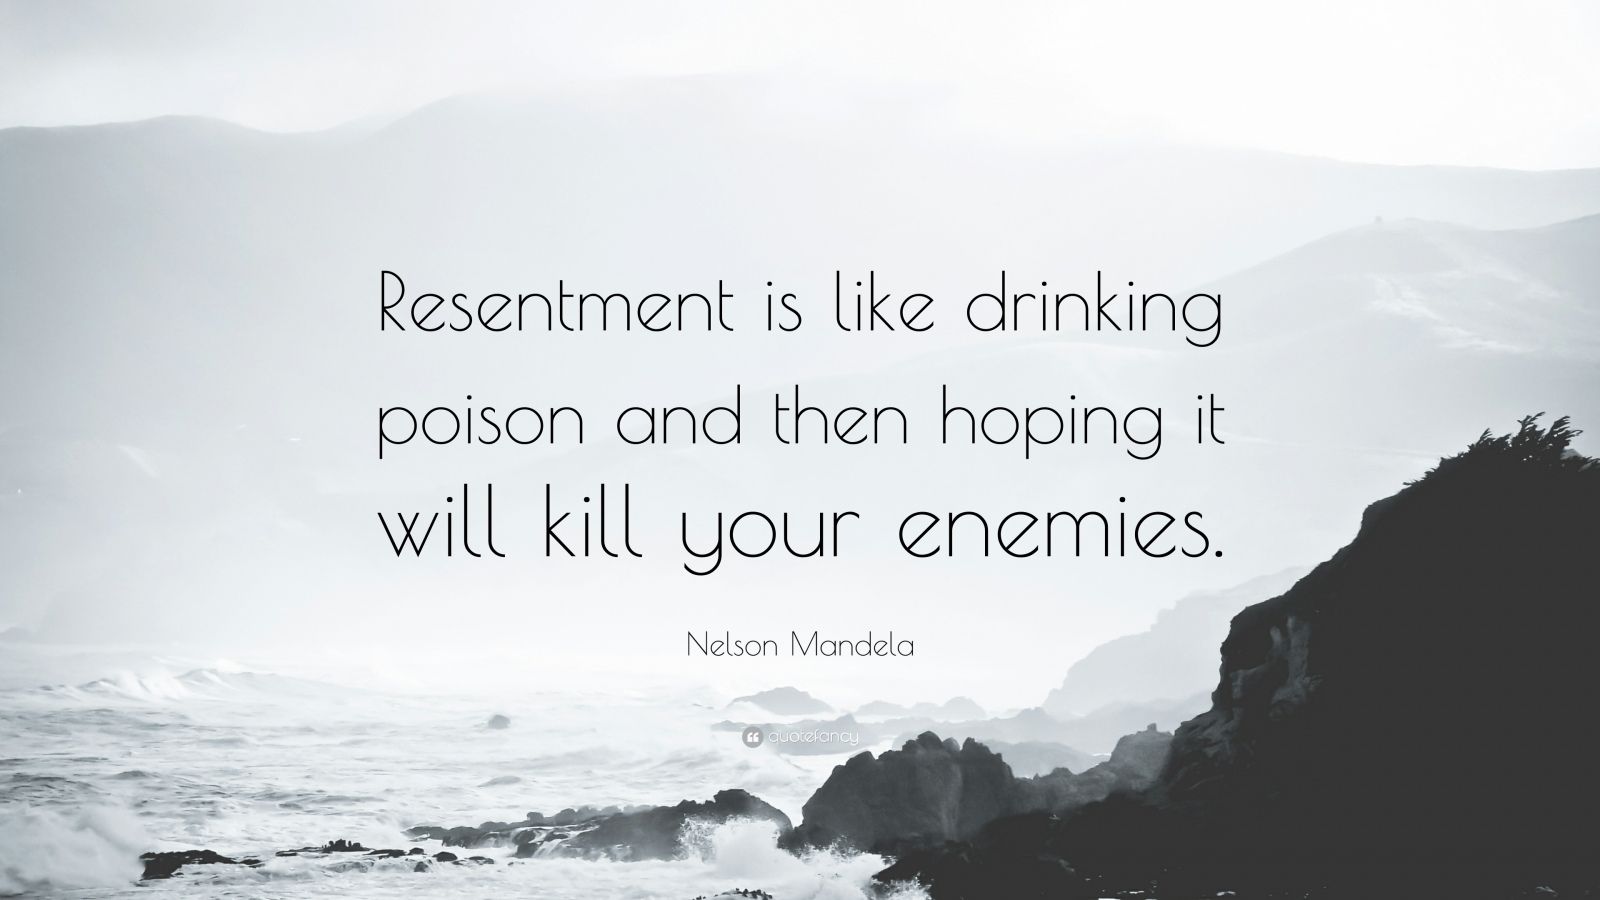 Quote by Nelson Mandela, "Resentment is like drinking poison and then hoping it will kill your enemies."